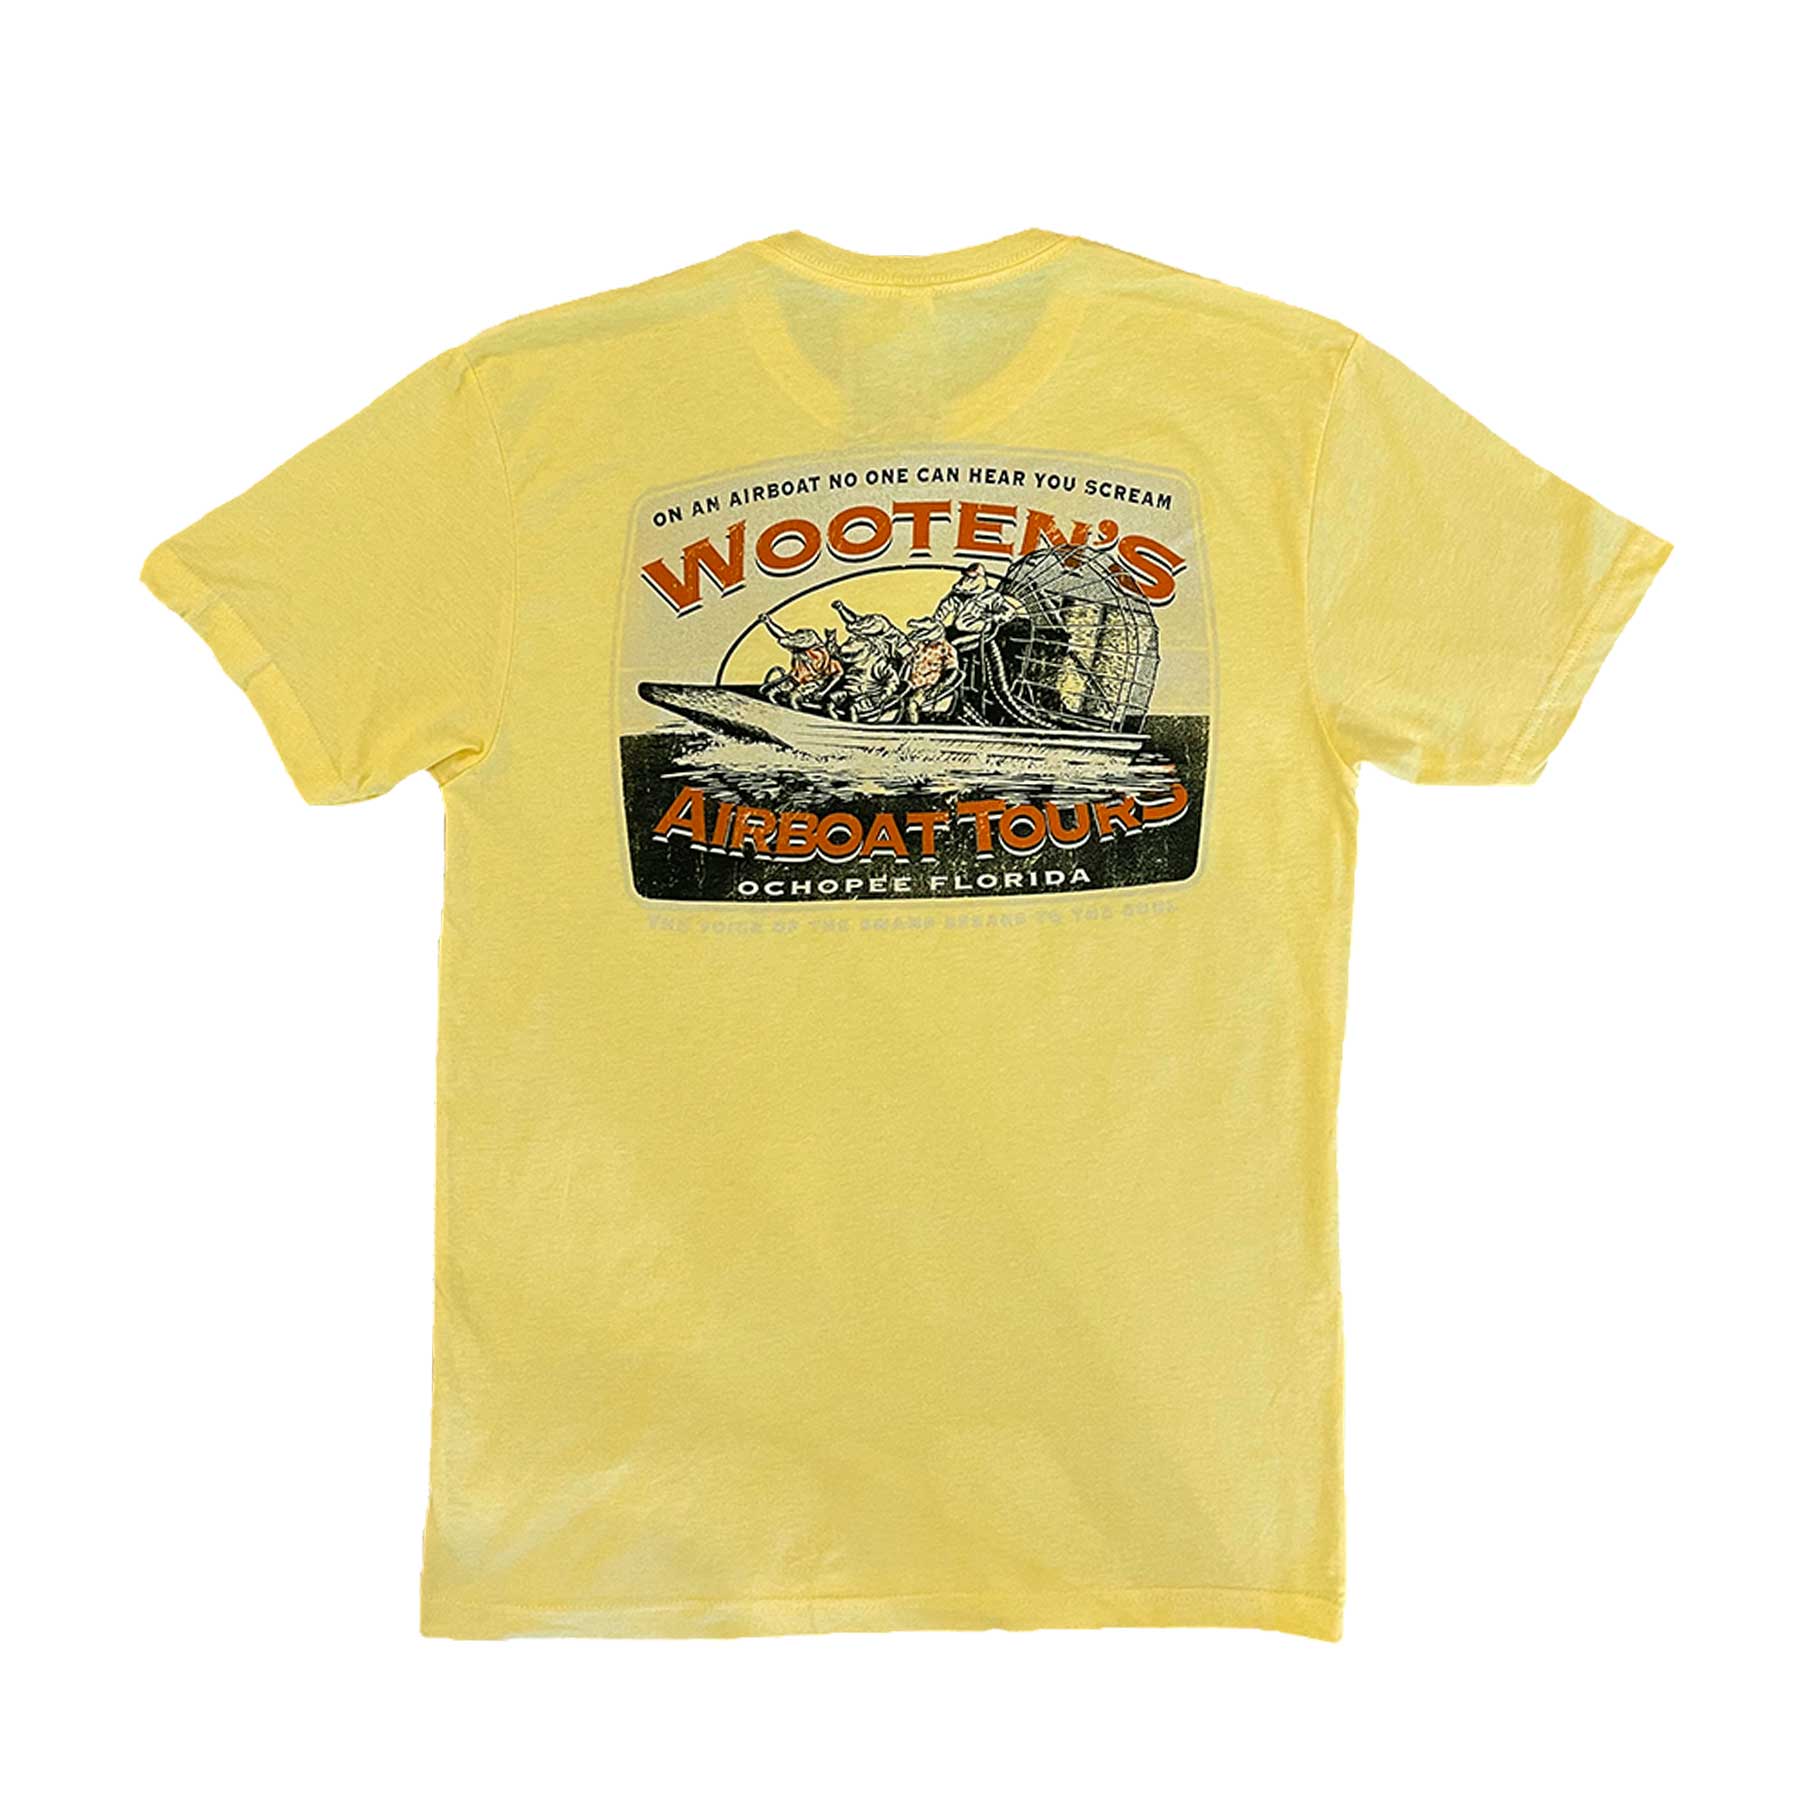 Voice of the Swamp T-Shirt - Wooten's Everglades Airboat Tours